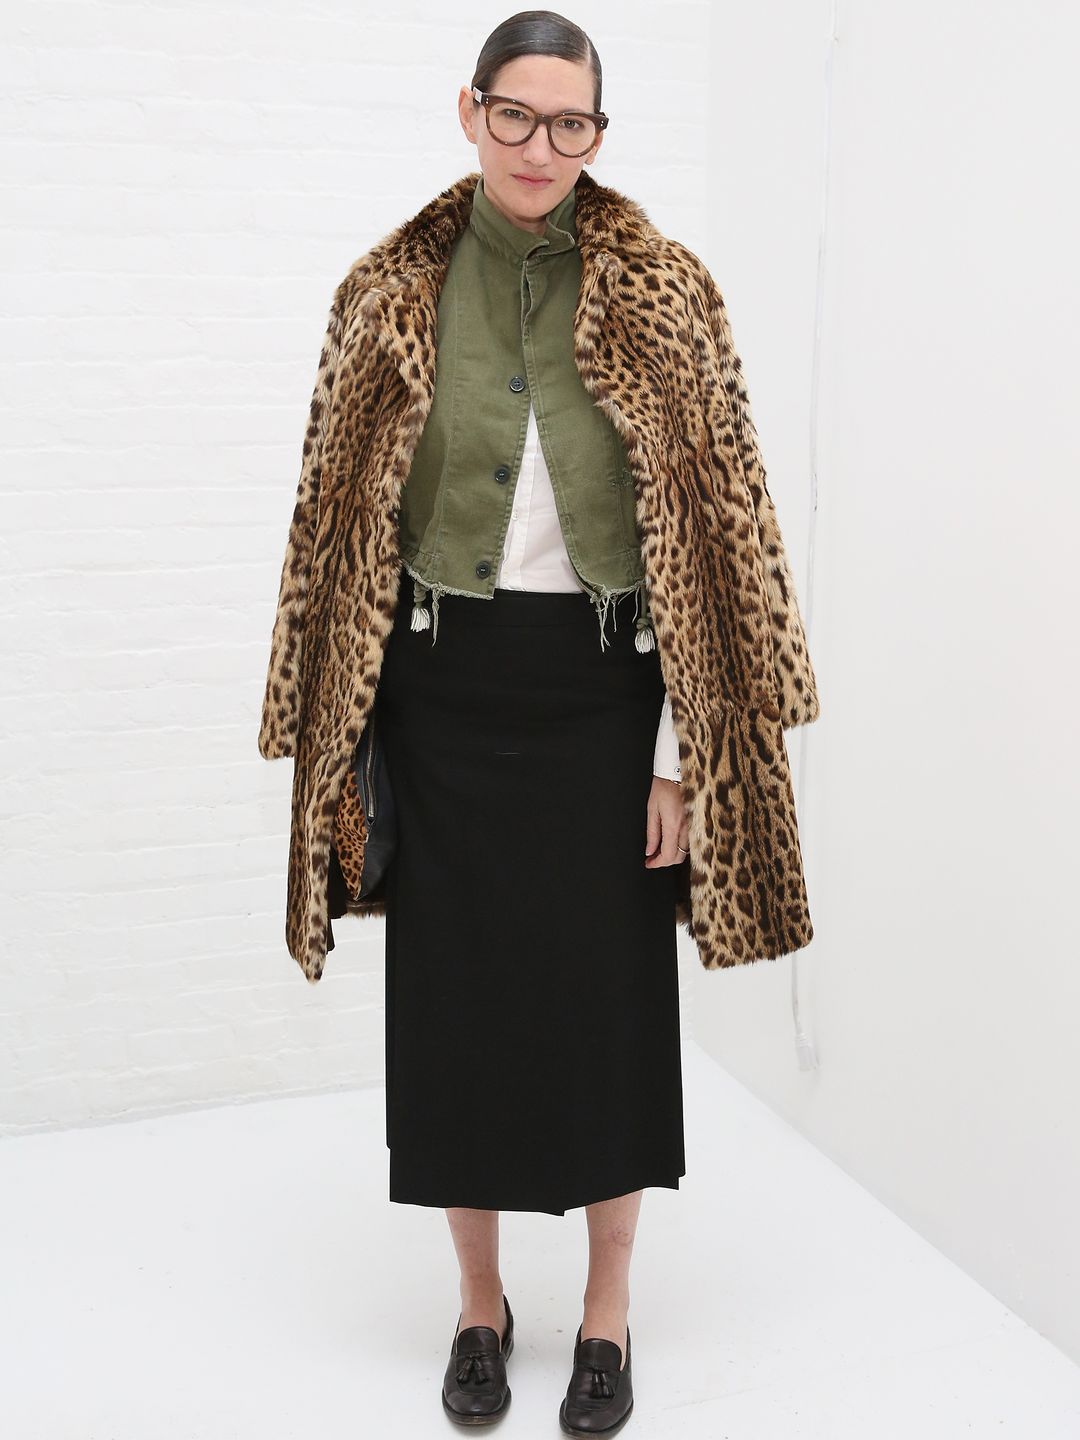 Jenna Lyons is famed for her quote, "as far as I'm concerned leopard is a neutral."